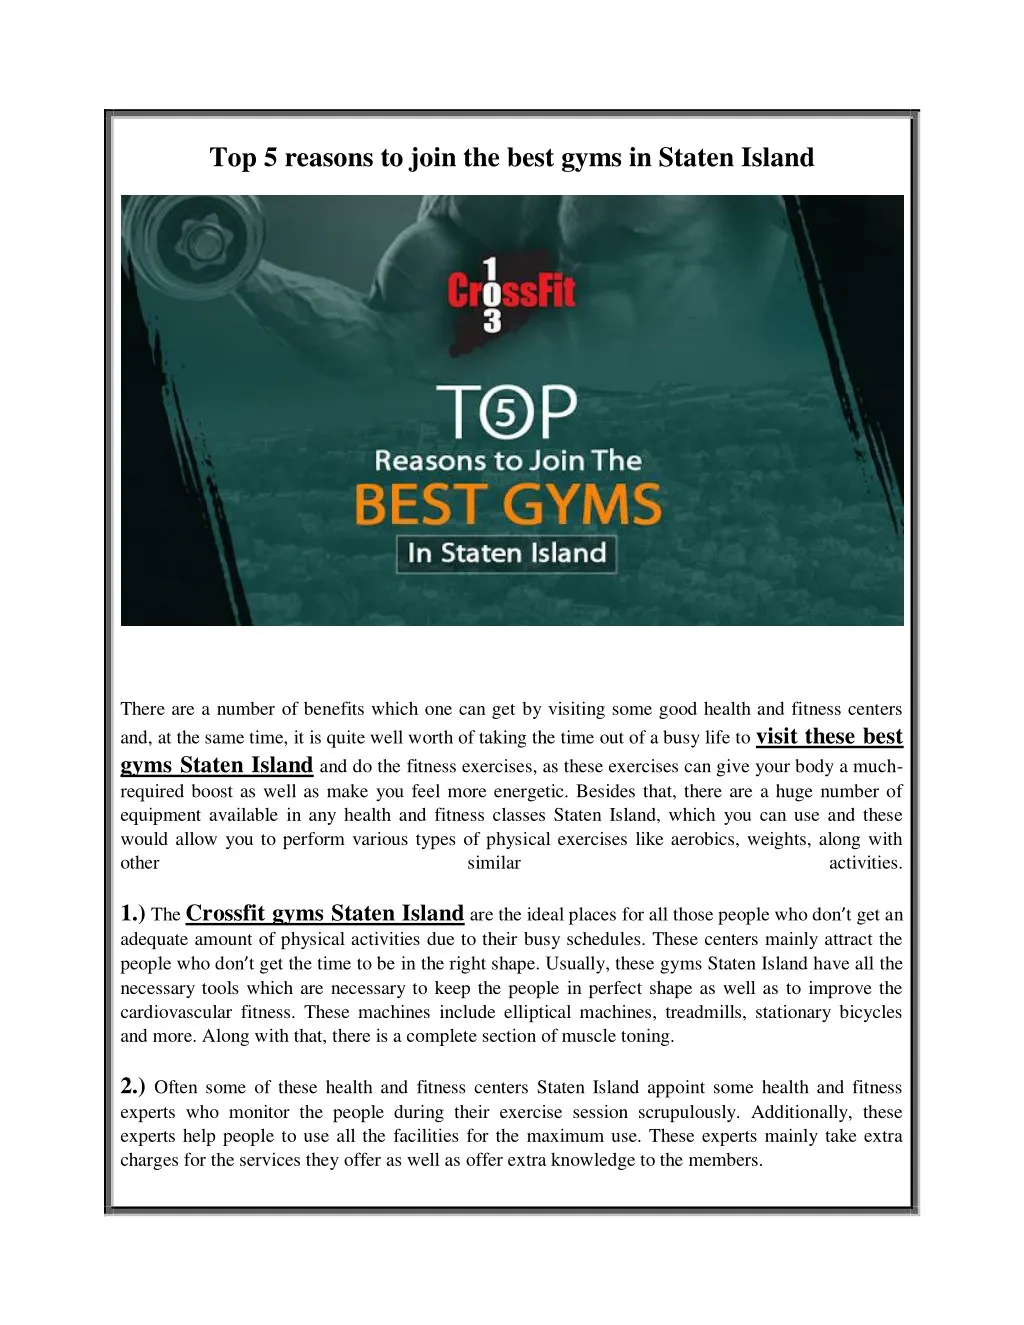 top 5 reasons to join the best gyms in staten